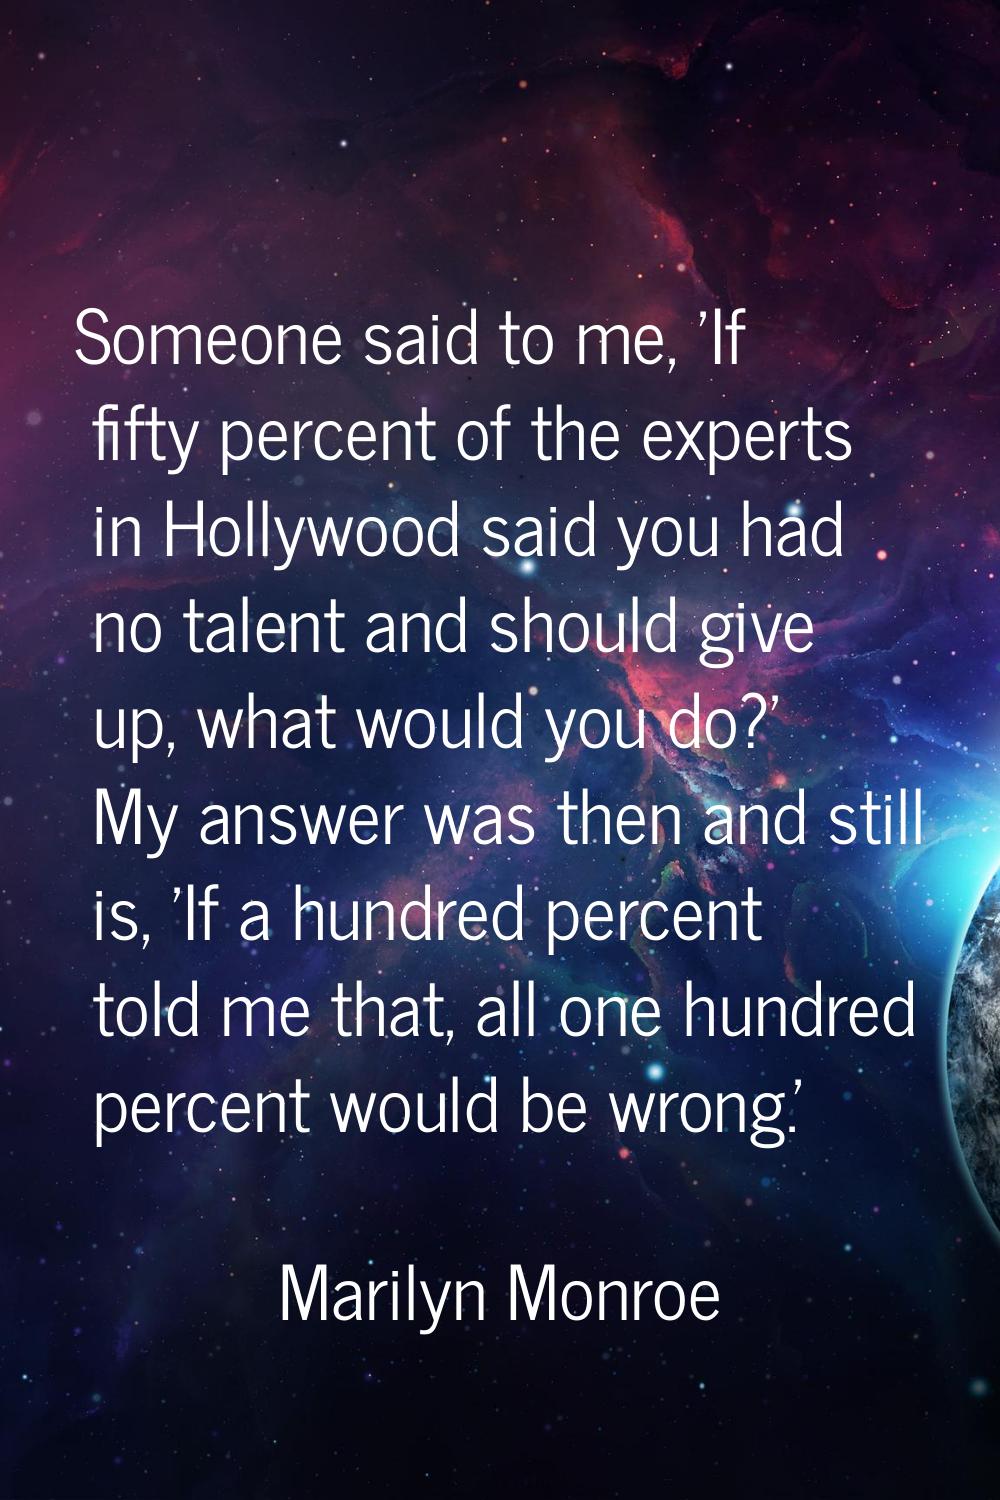 Someone said to me, 'If fifty percent of the experts in Hollywood said you had no talent and should